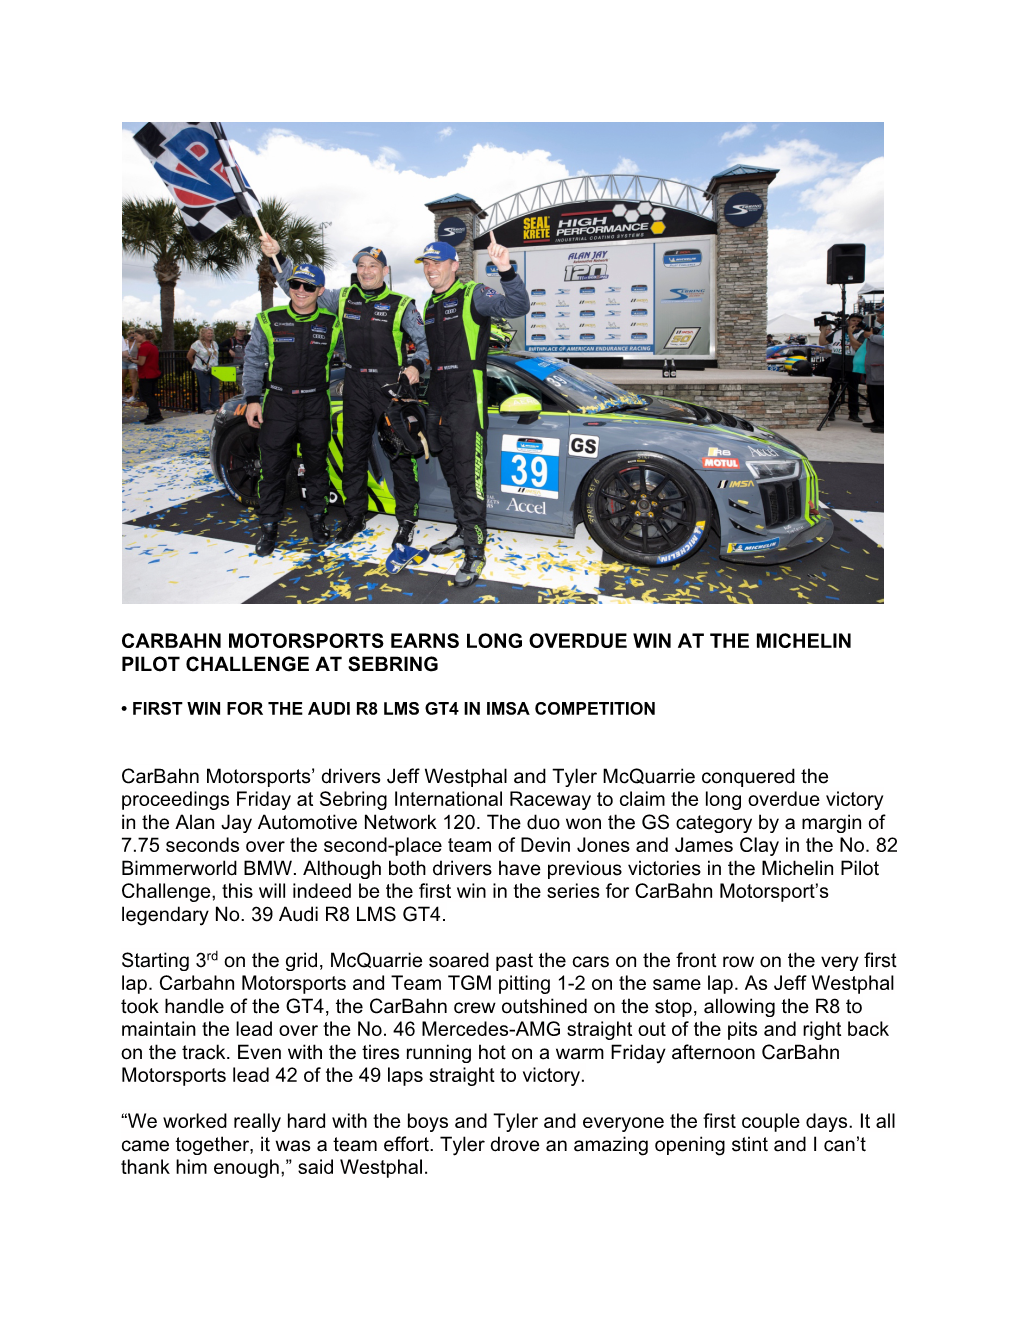 CARBAHN MOTORSPORTS EARNS LONG OVERDUE WIN at the MICHELIN PILOT CHALLENGE at SEBRING Carbahn Motorsports' Drivers Jeff Westph